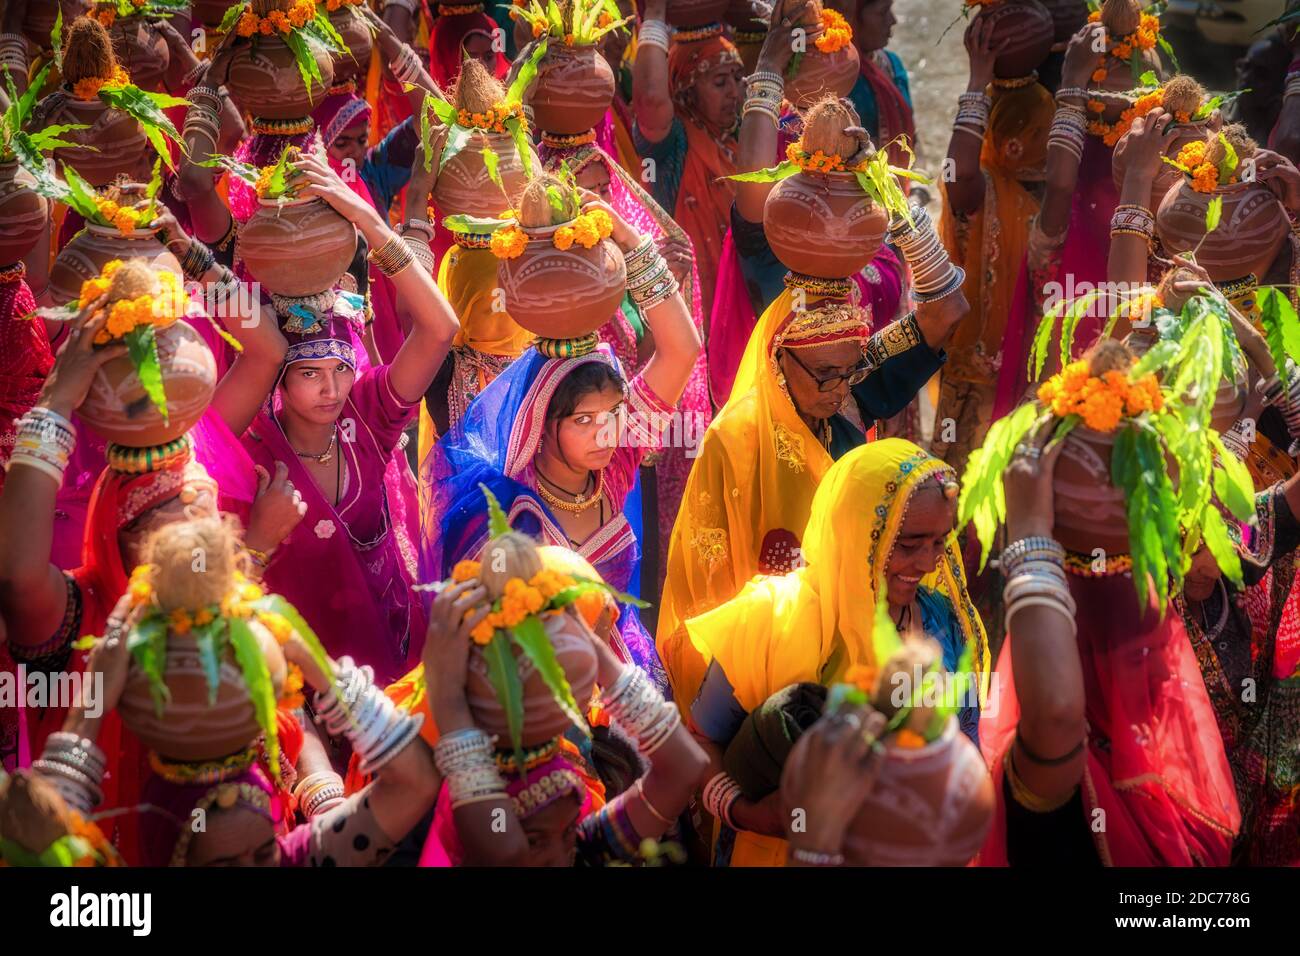 Indian women carrying offerings on their heads during a Rajasthan festival, Pushkar, India Stock Photo